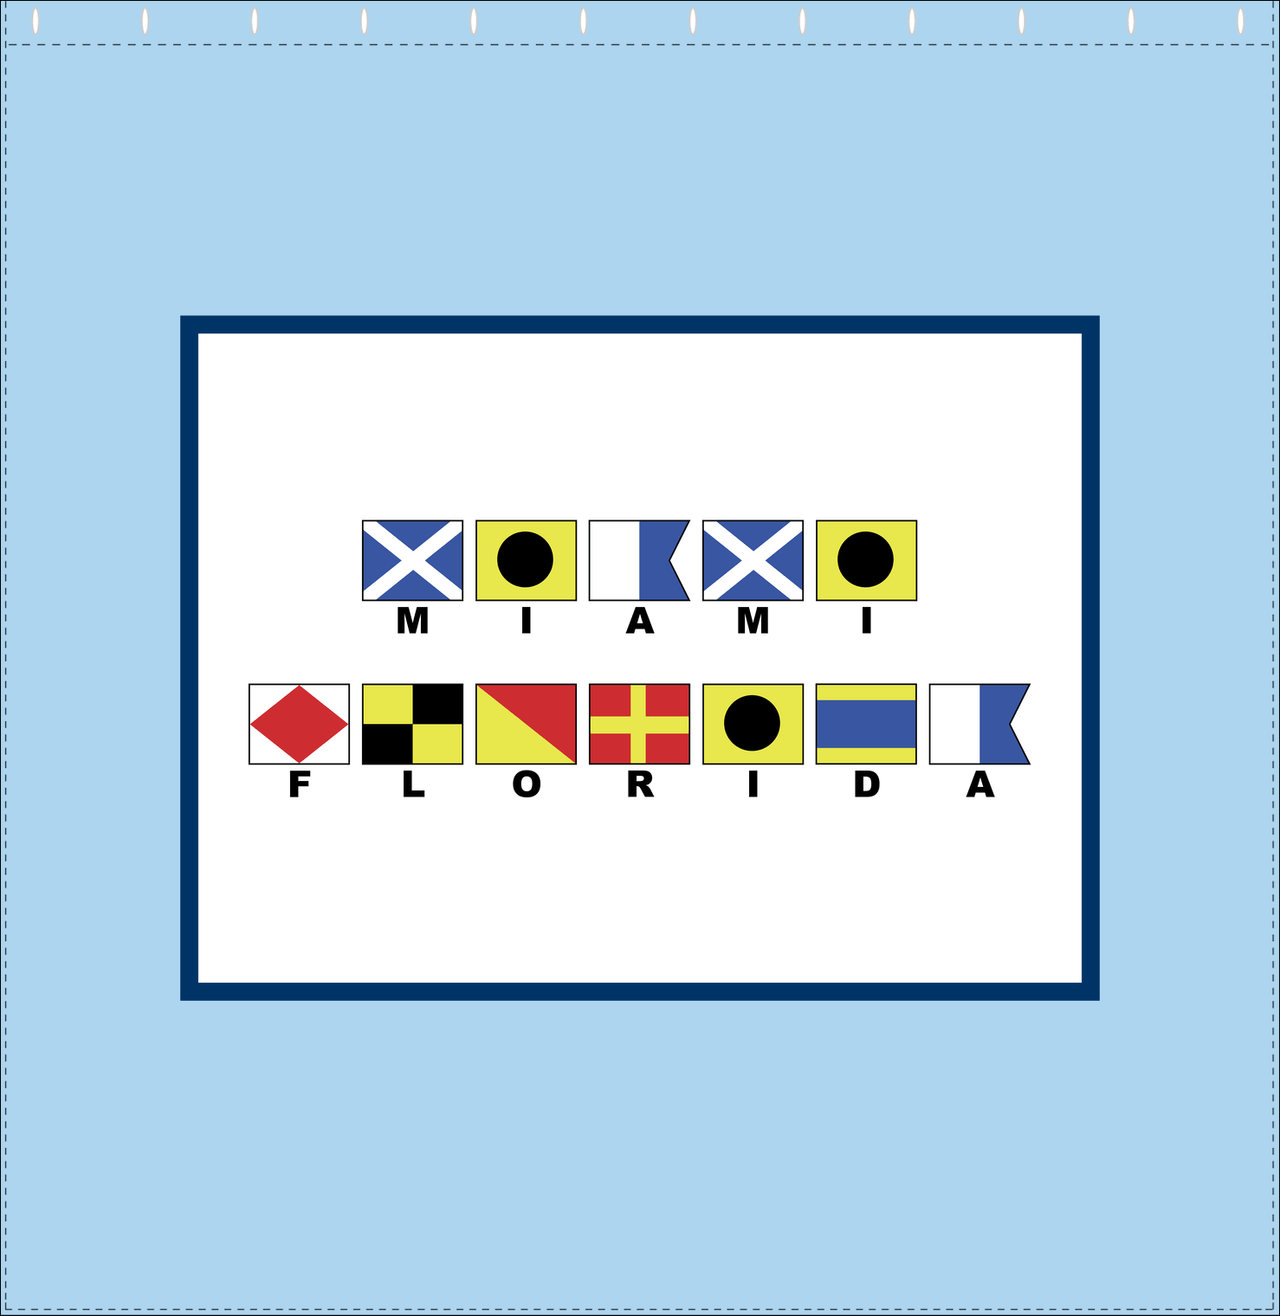 Personalized Nautical Flags Shower Curtain - Blue and Navy - Flags With Small Letters - Decorate View